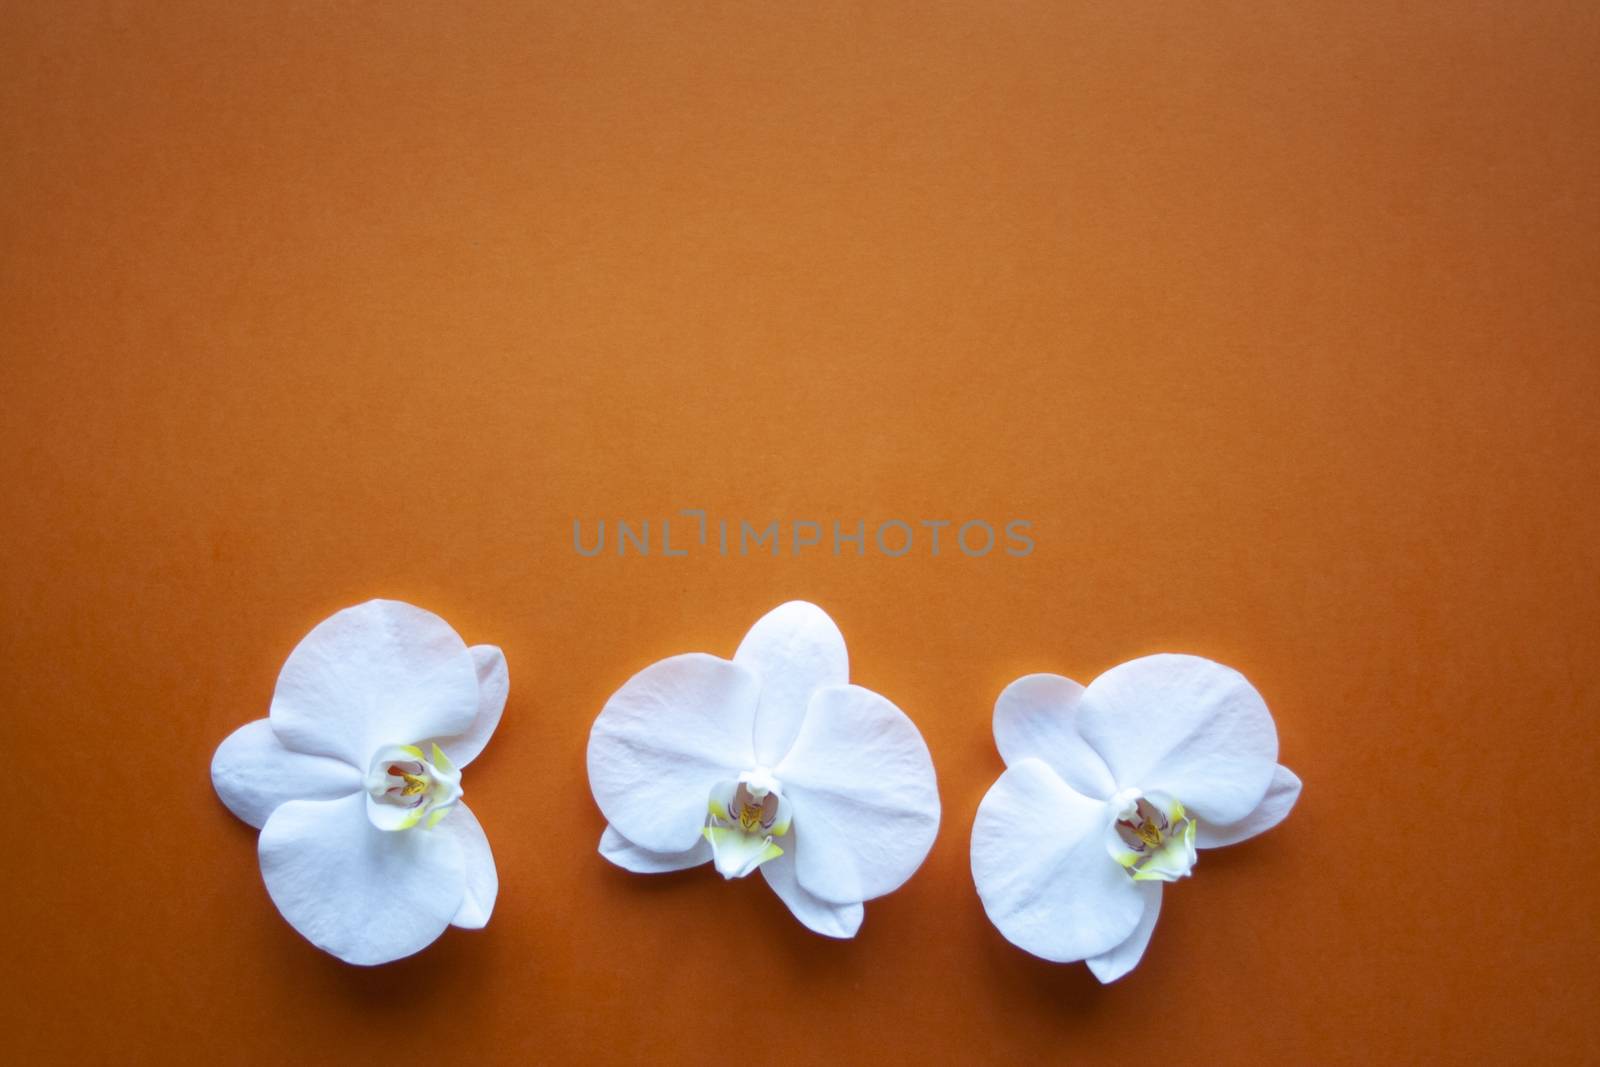 Three orchid flowers on beauty orange background top view. Backdrop with place for text, sale, design, women day, holiday, spa, cosmetics